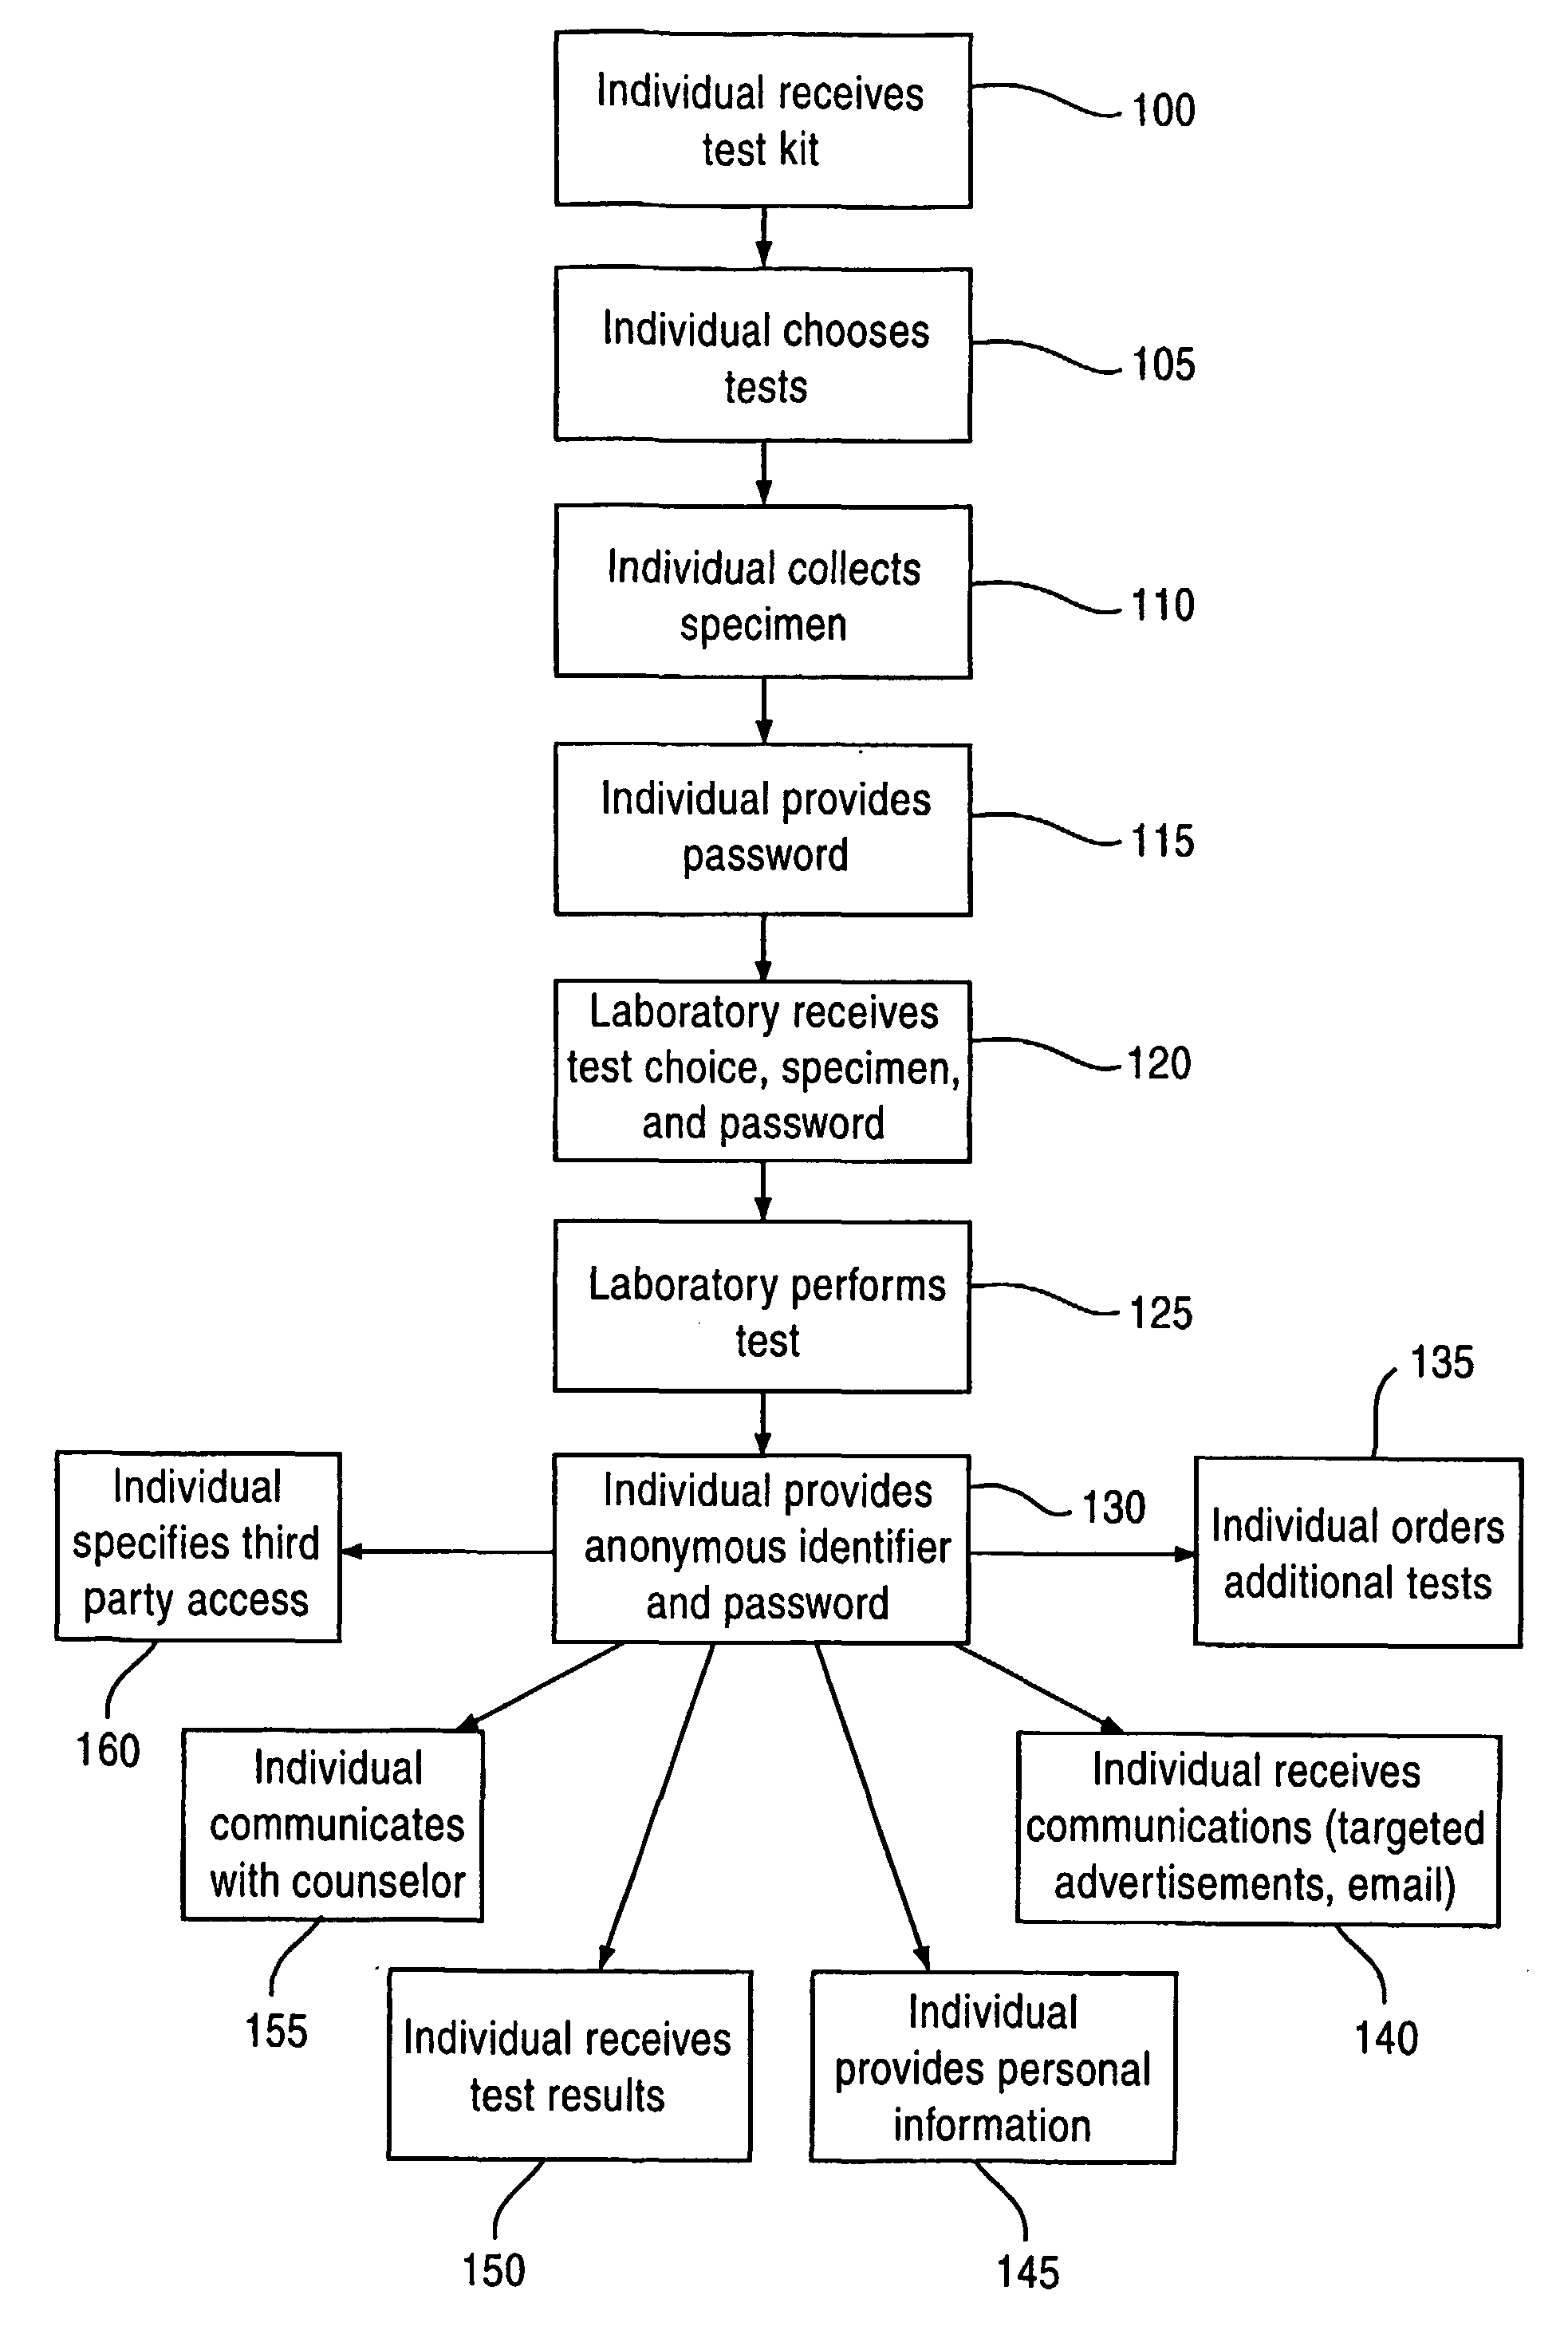 Method And System For Comprehensive Knowledge-Based Anonymous Testing And Reporting, And Providing Selective Access To Test Results And Report